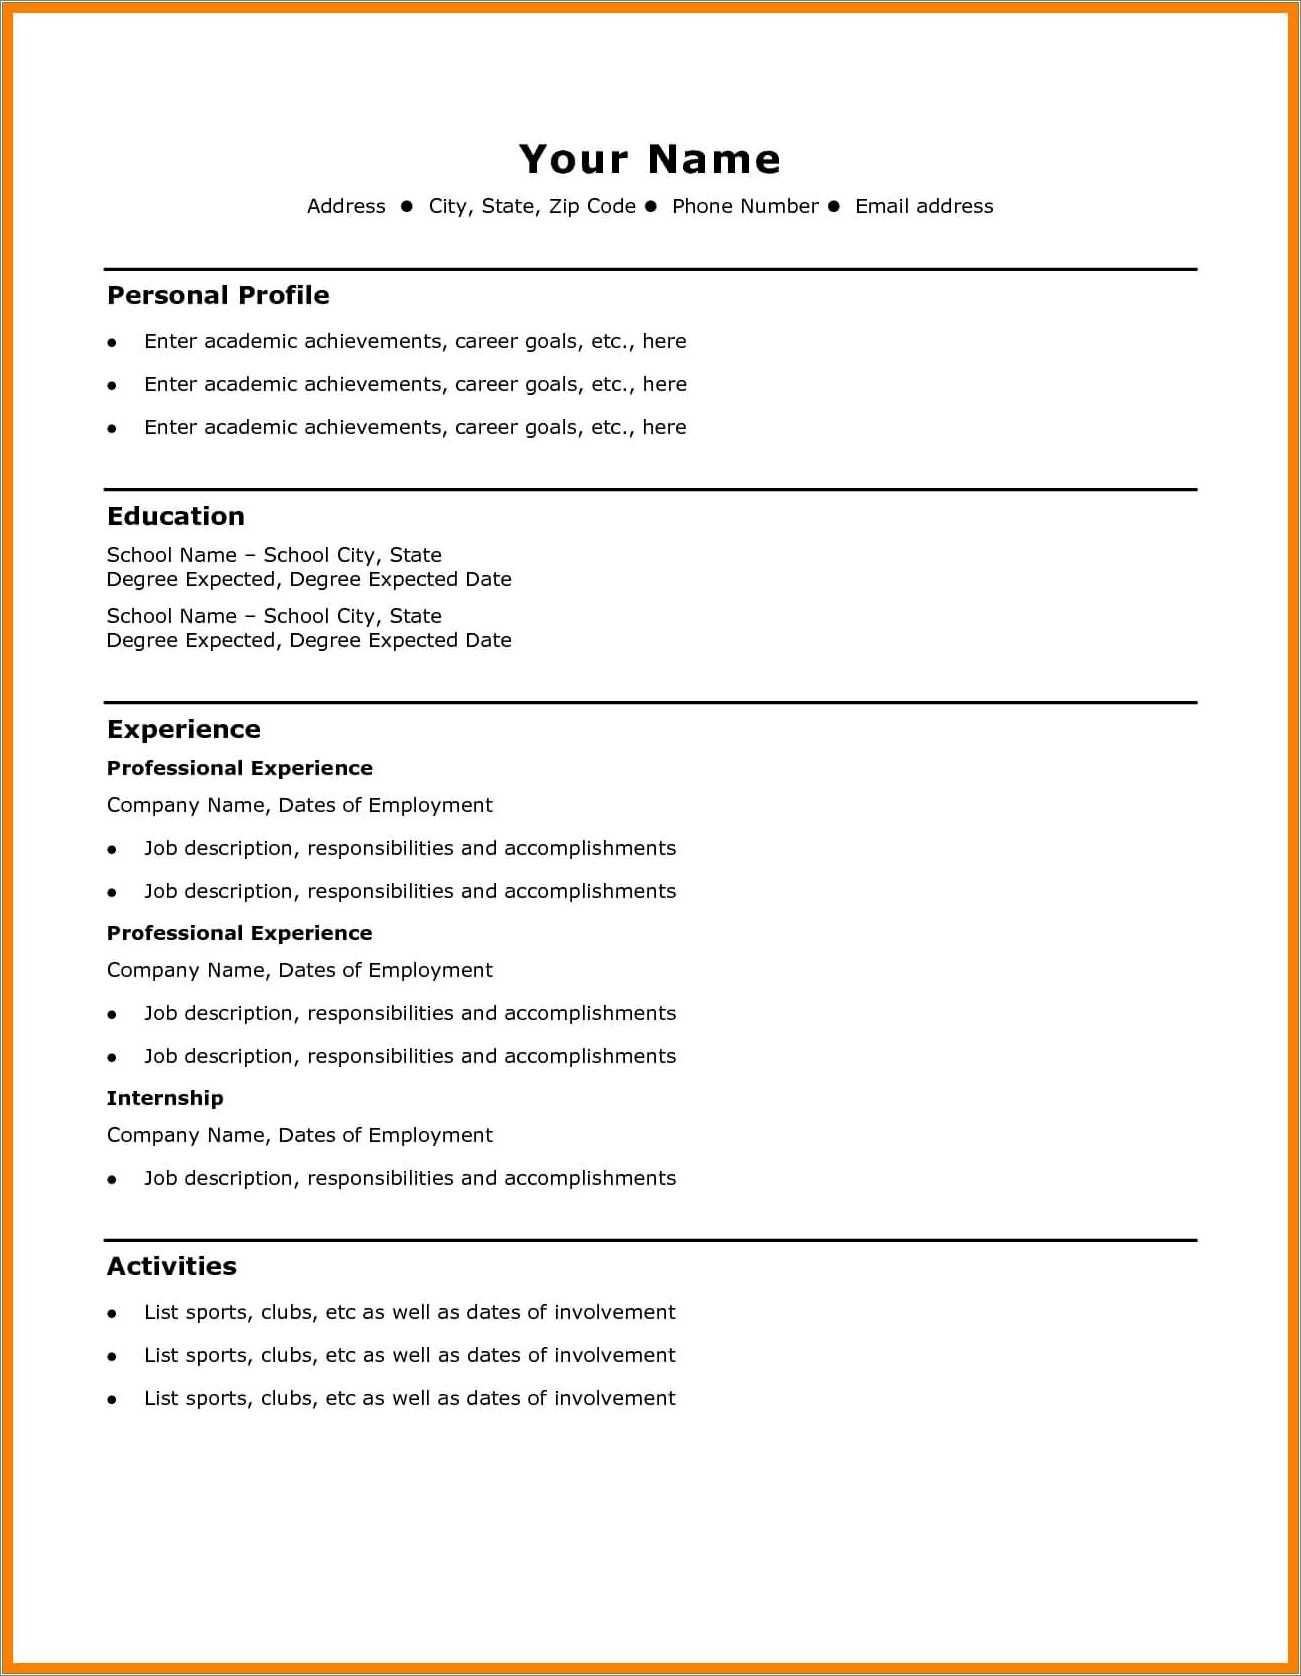 creating-a-resume-from-scratch-in-word-resume-example-gallery